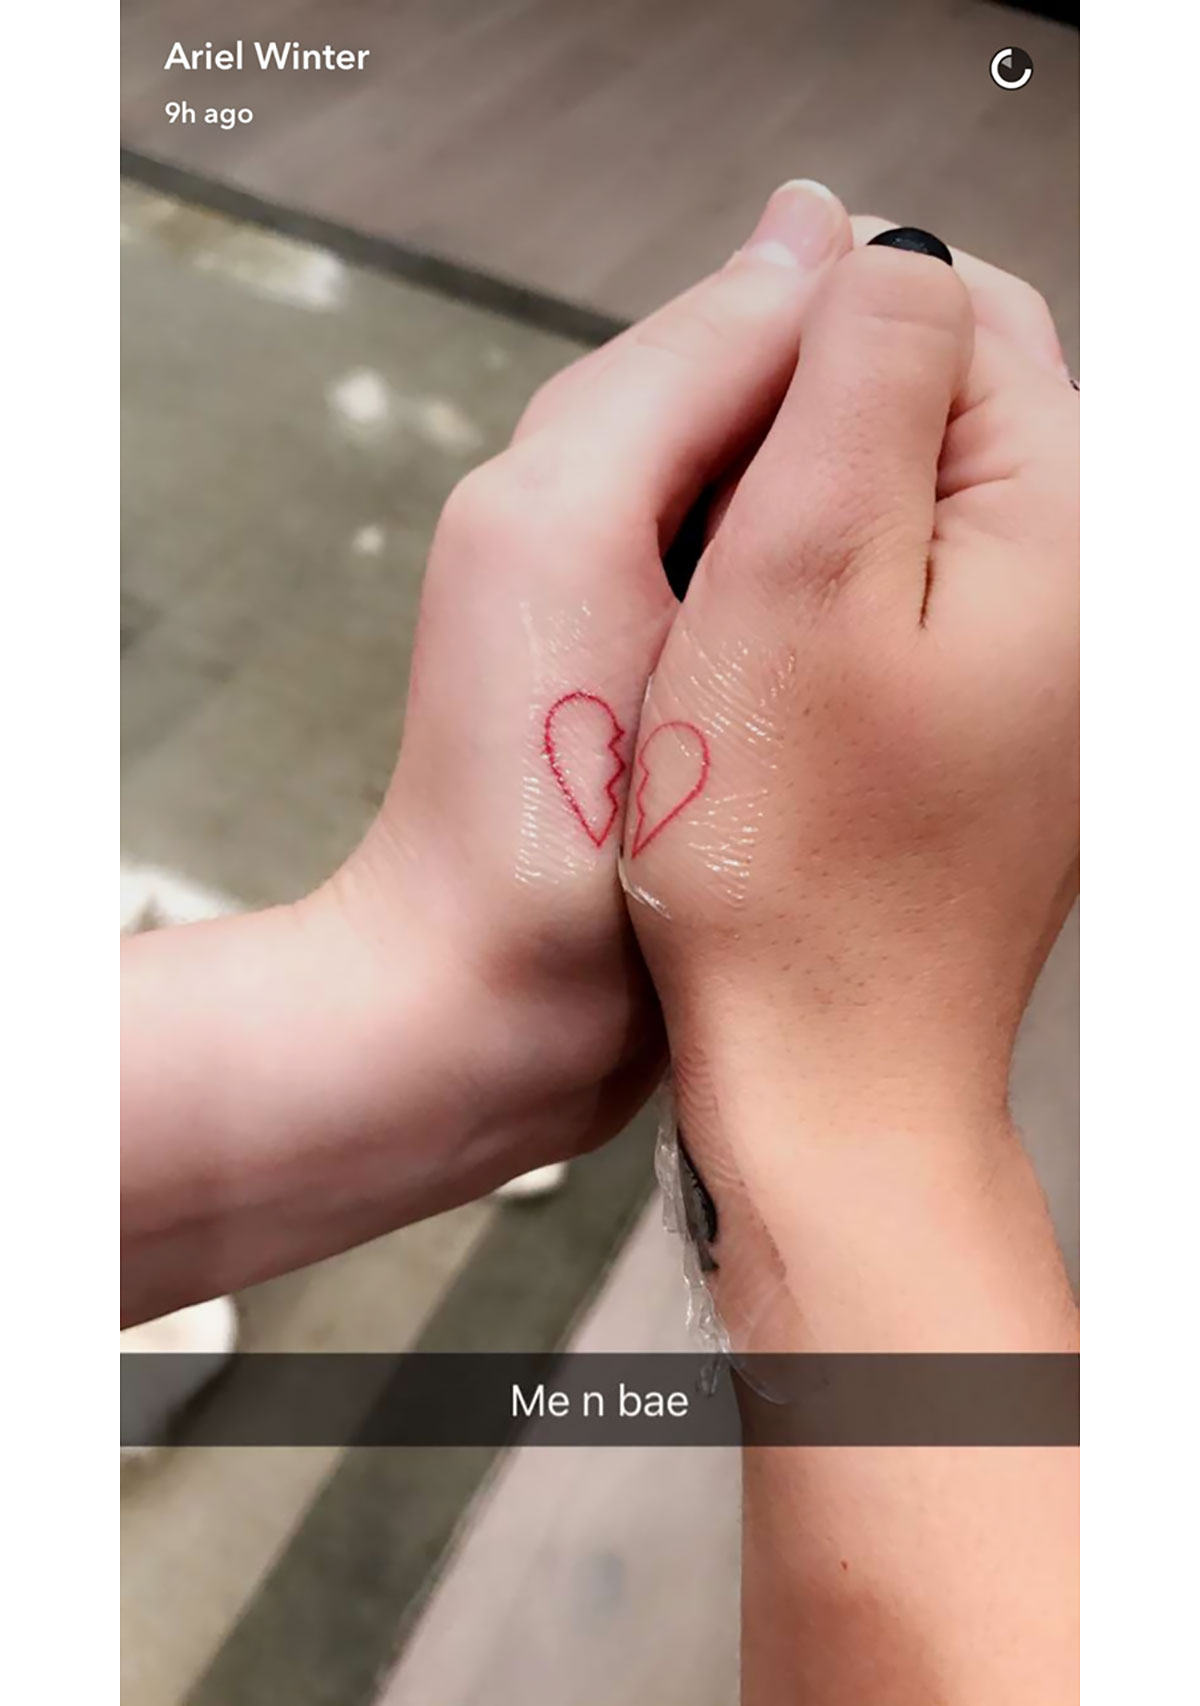 Matching ring tattoo for couple, minimalistic style.